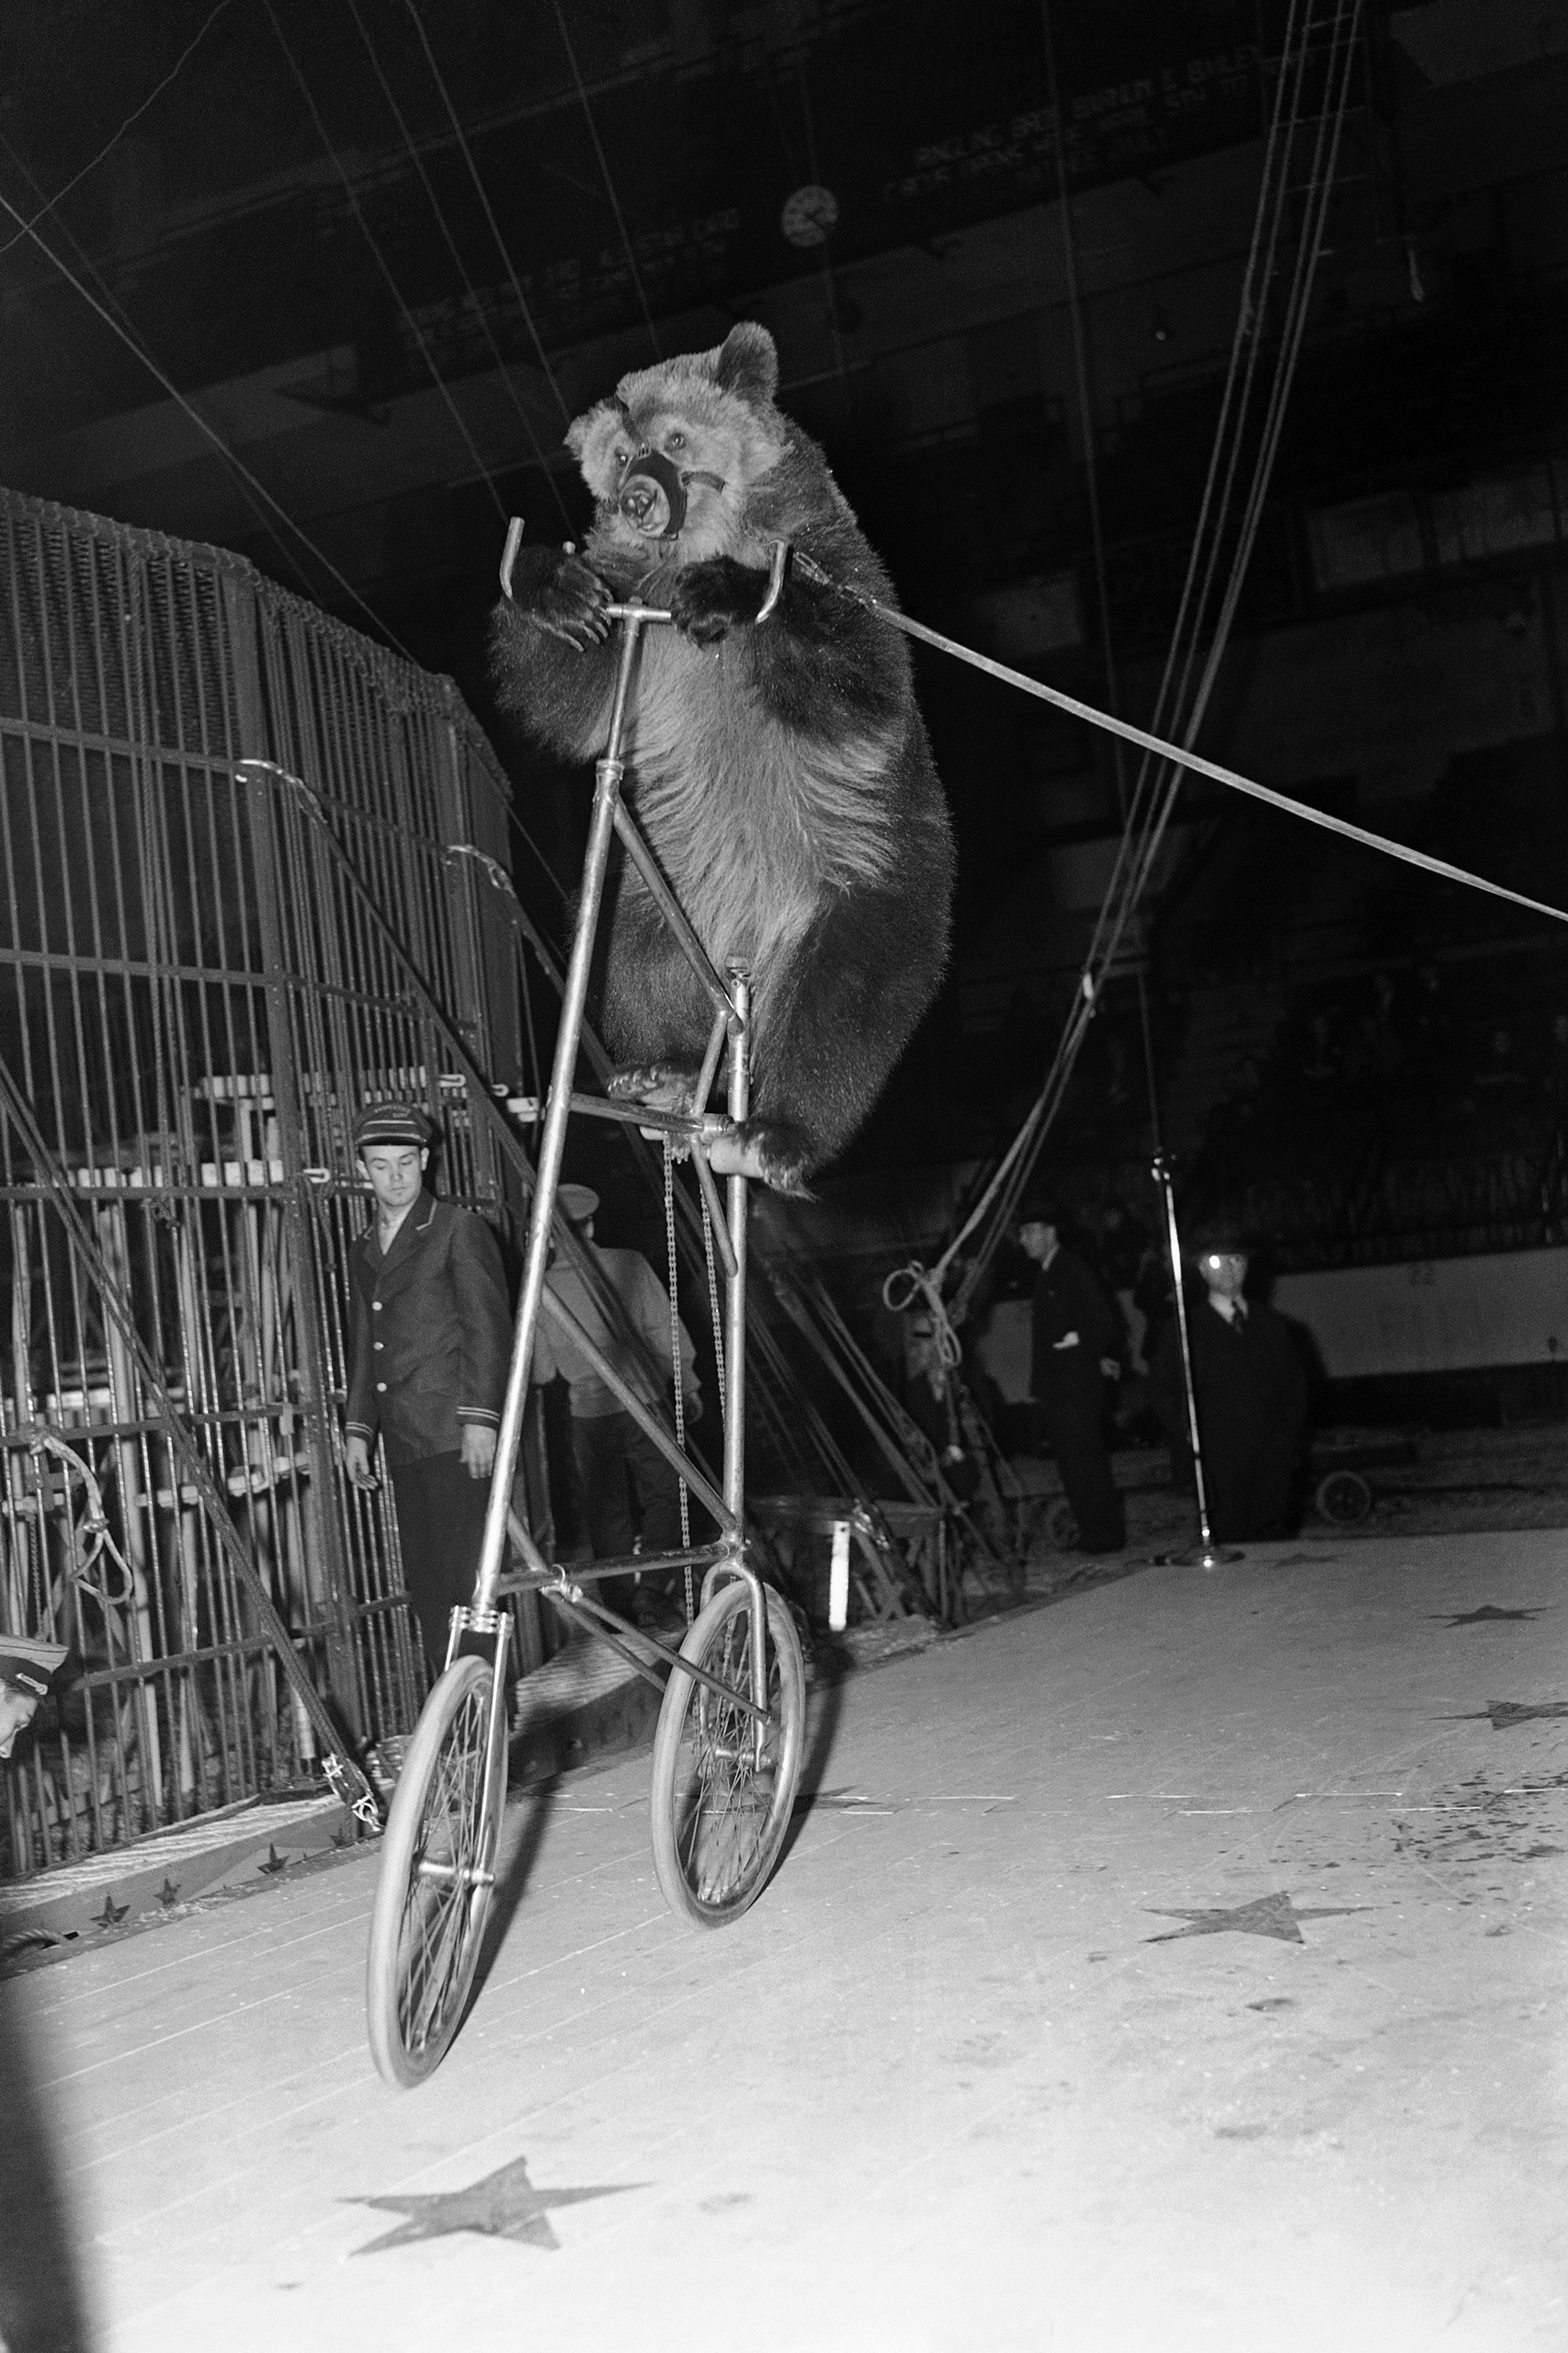 Circus bear "Fritz" seems none too pleased with his predicament as he pedals his "high strung" bicycle around at the opening of the Ringling Brothers and Barnum &amp; Bailey Circus at Madison Square Garden, New York, April 5, 1939. (AP Photo/Tom Sande)